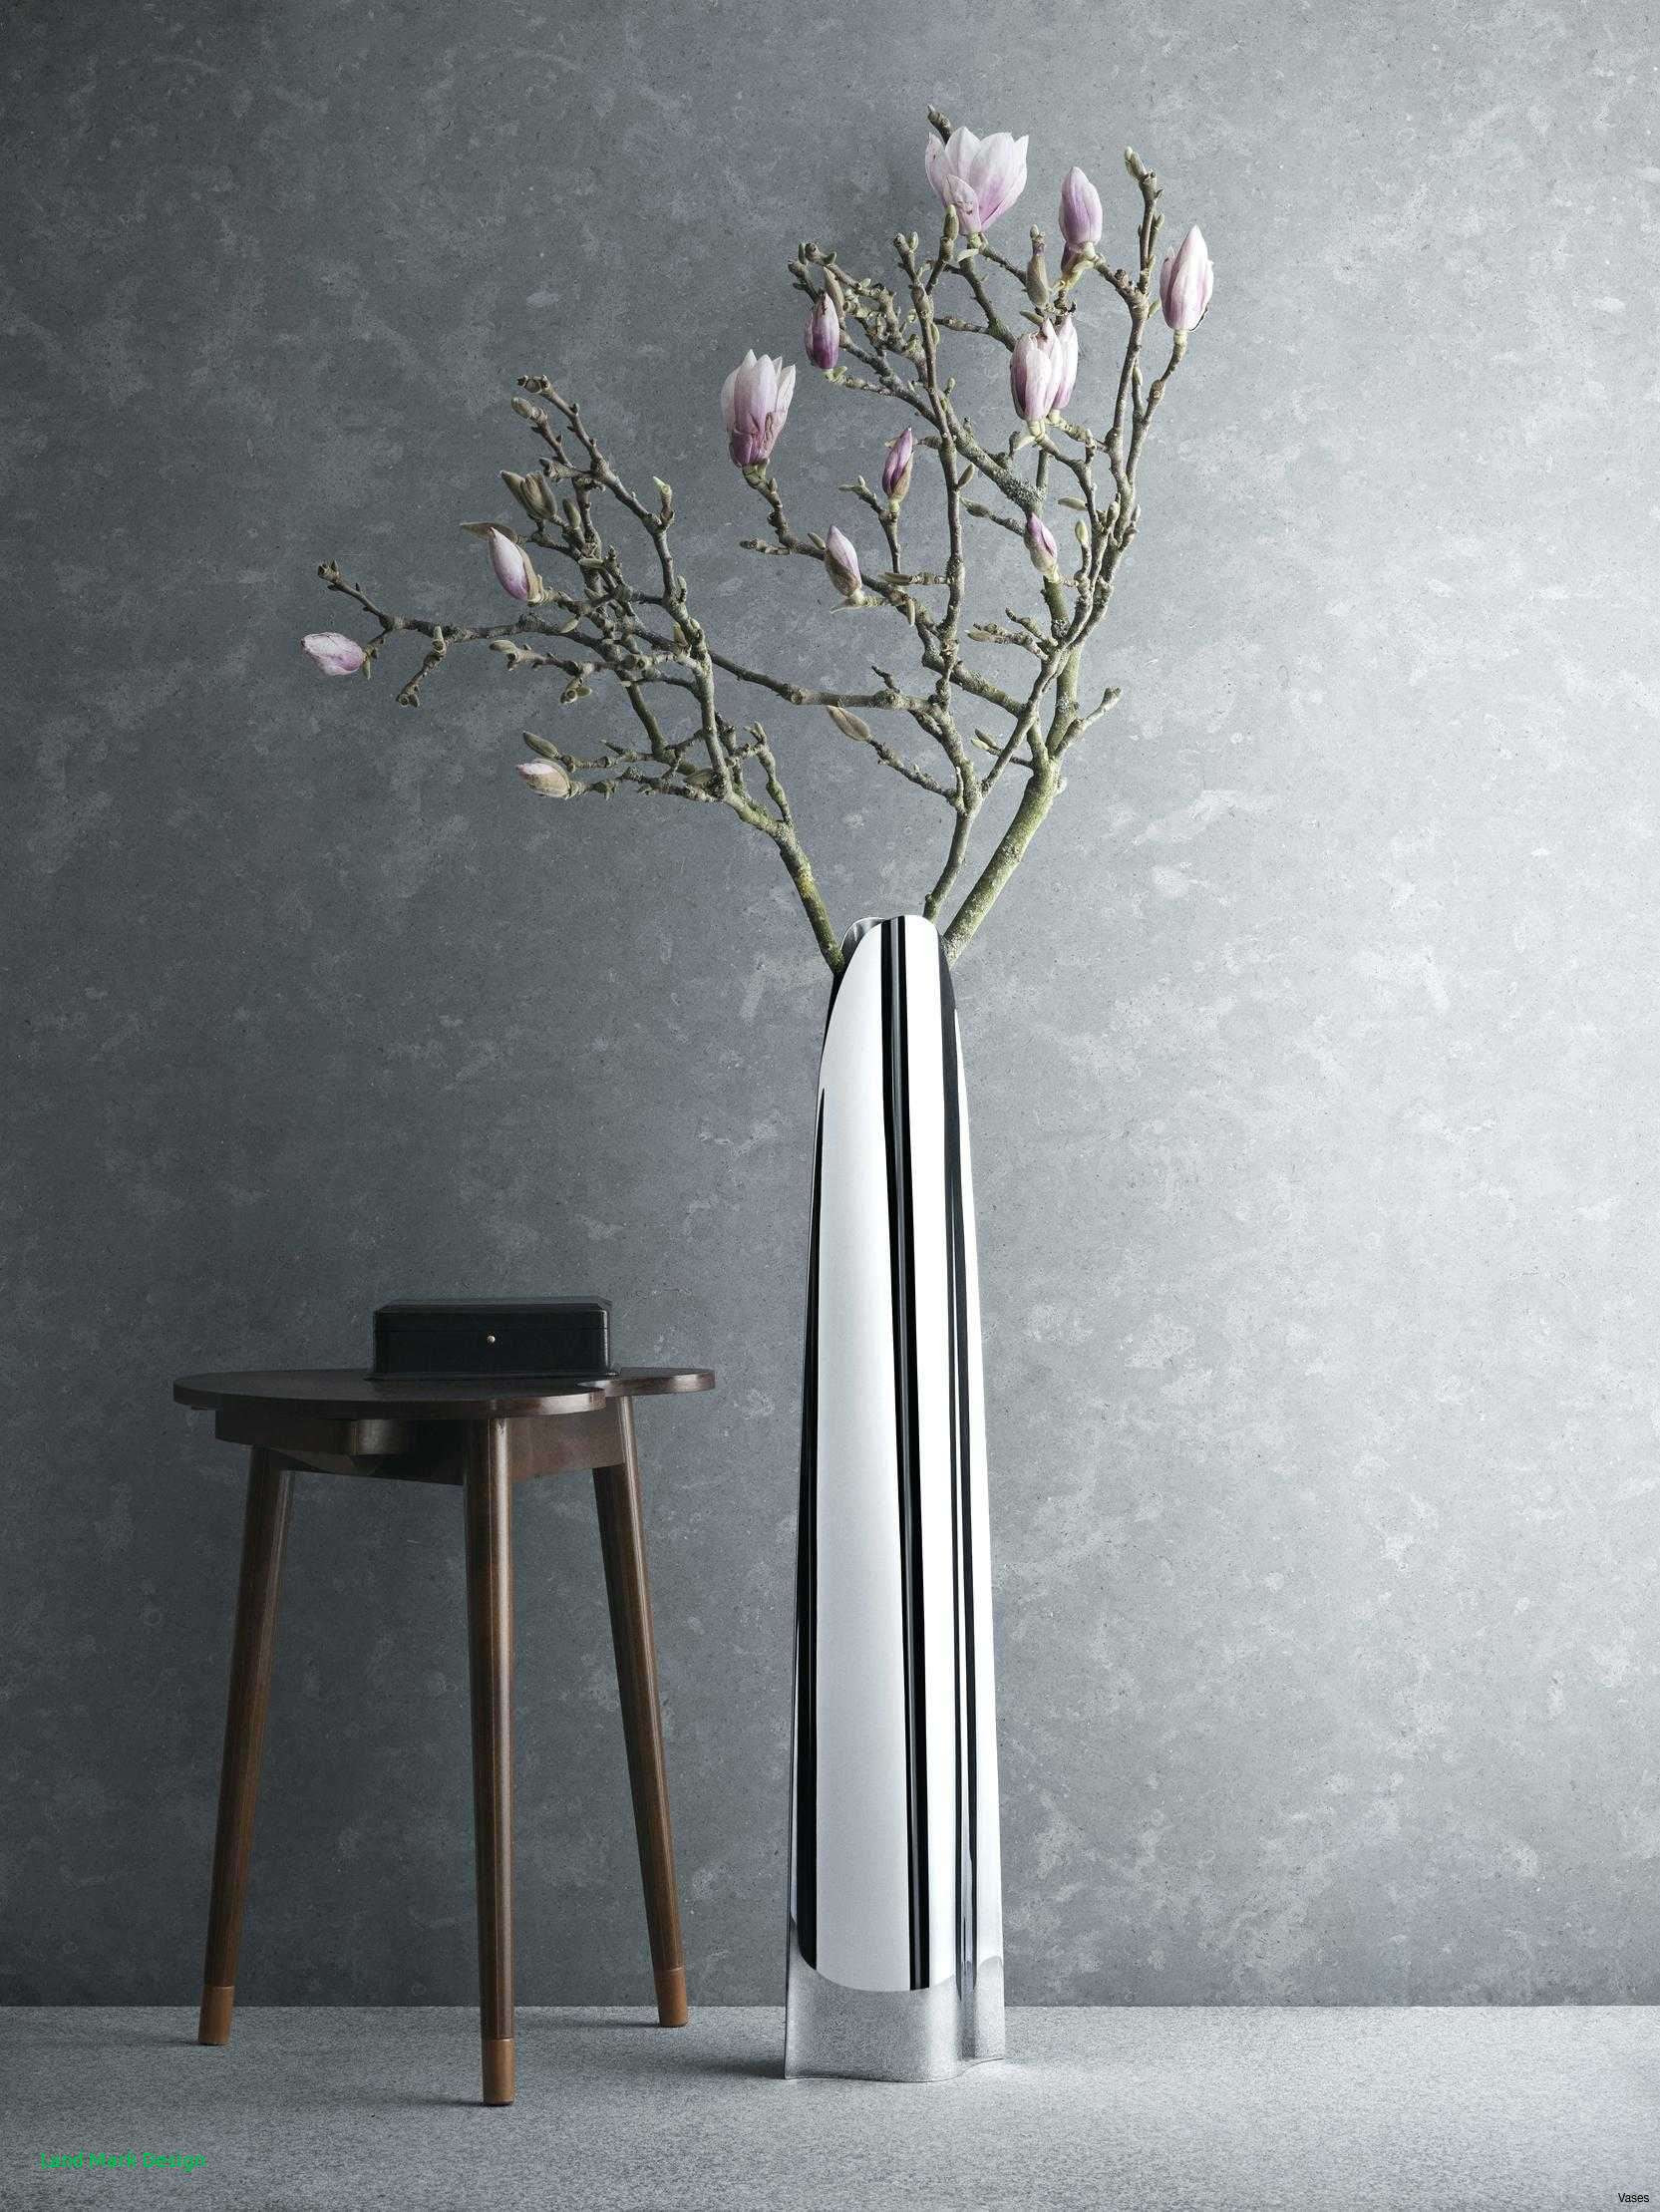 15 Perfect Large Rustic Floor Vases 2024 free download large rustic floor vases of floor vase branches images 30 new decorative sticks for vases inside floor vase branches image tall vase with branches design of floor vase branches images 30 new